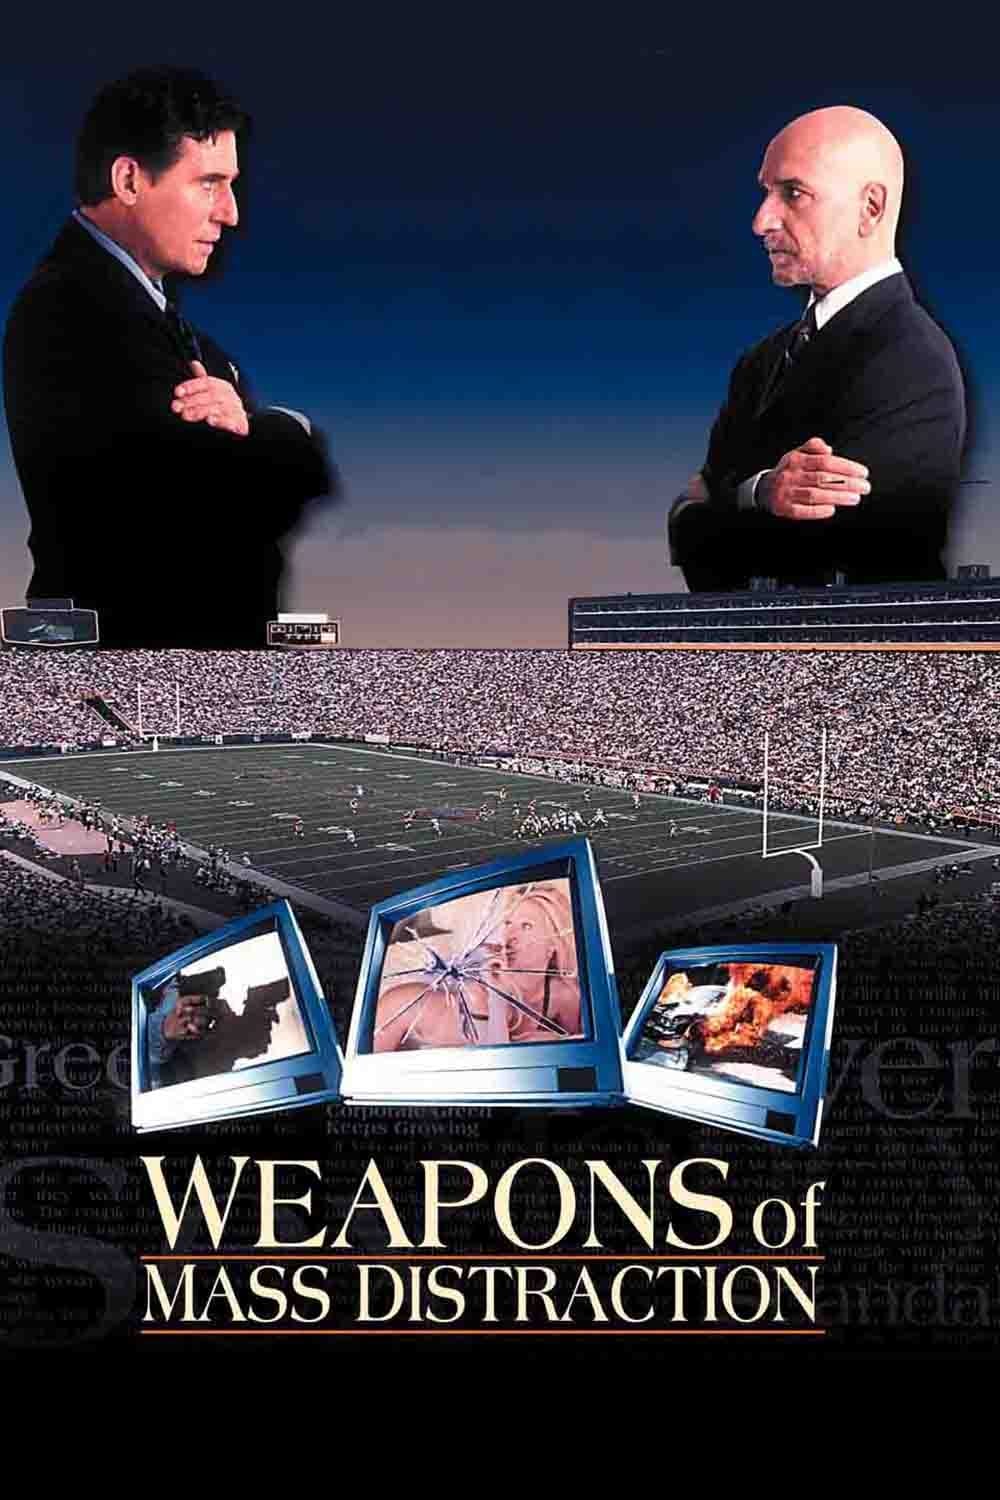 Weapons of Mass Distraction (1997)